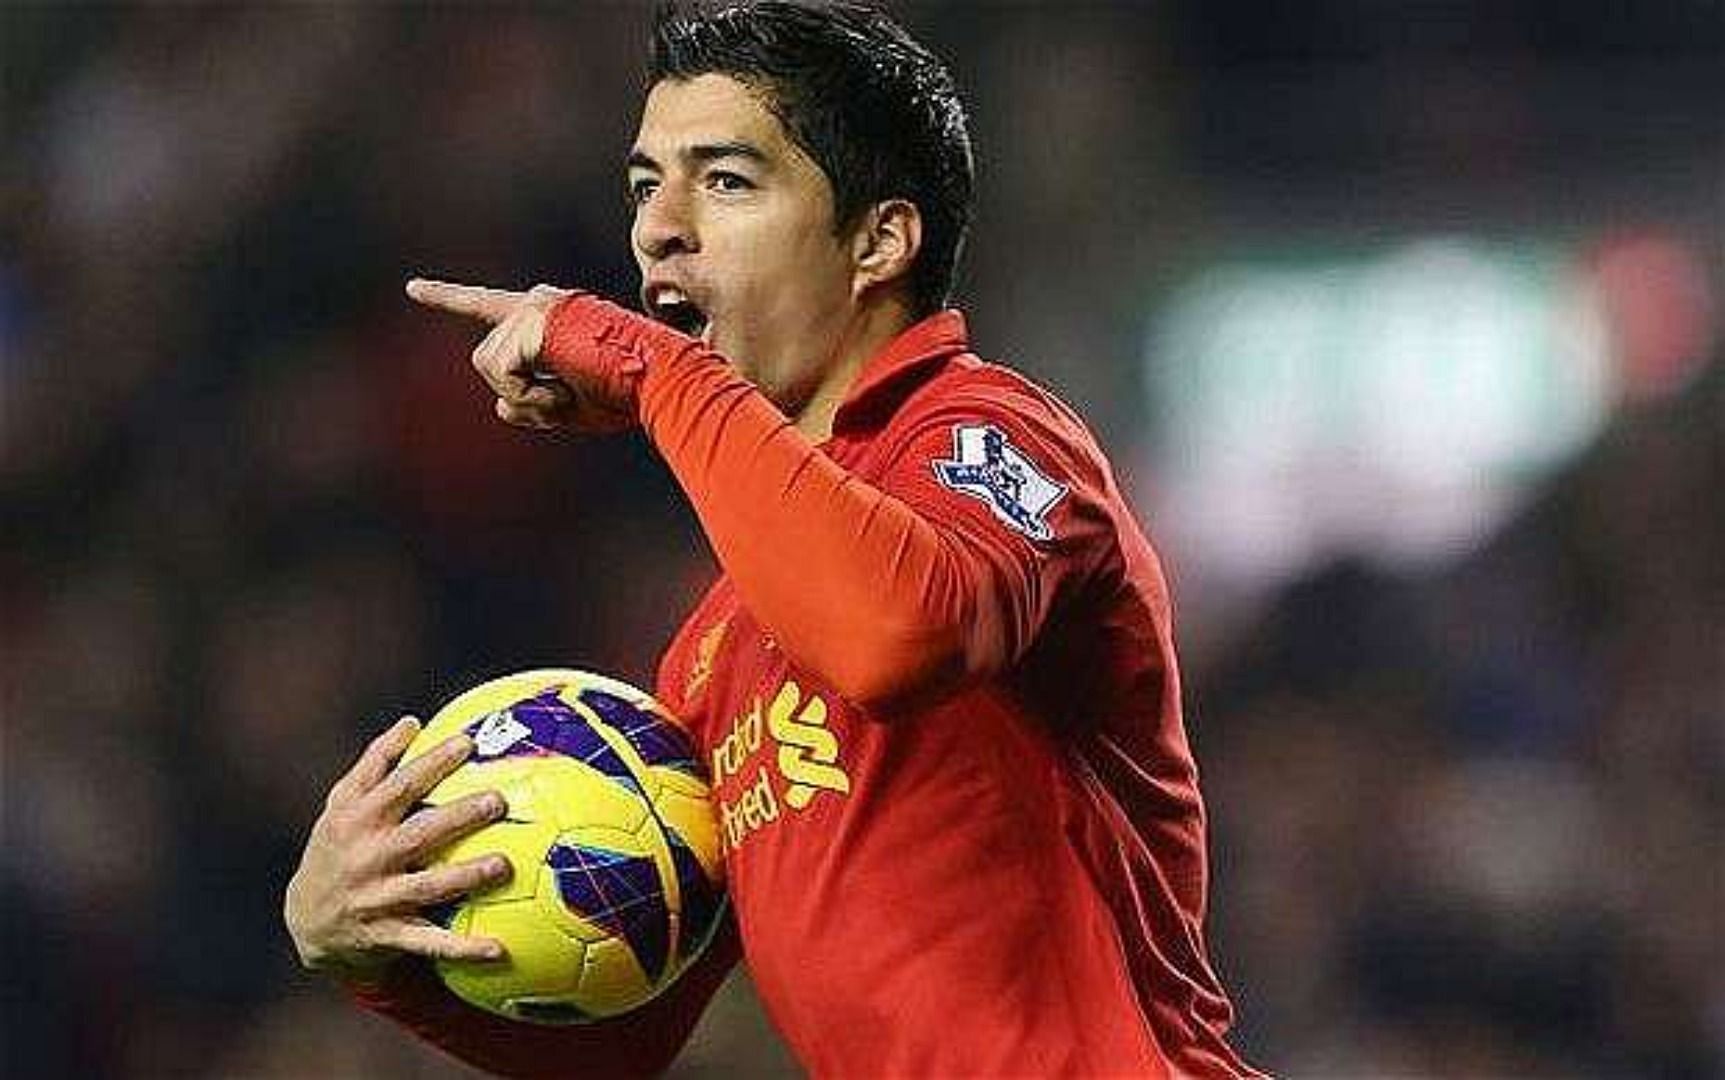 To call Luis Suarez a controversial character would be an understatement.